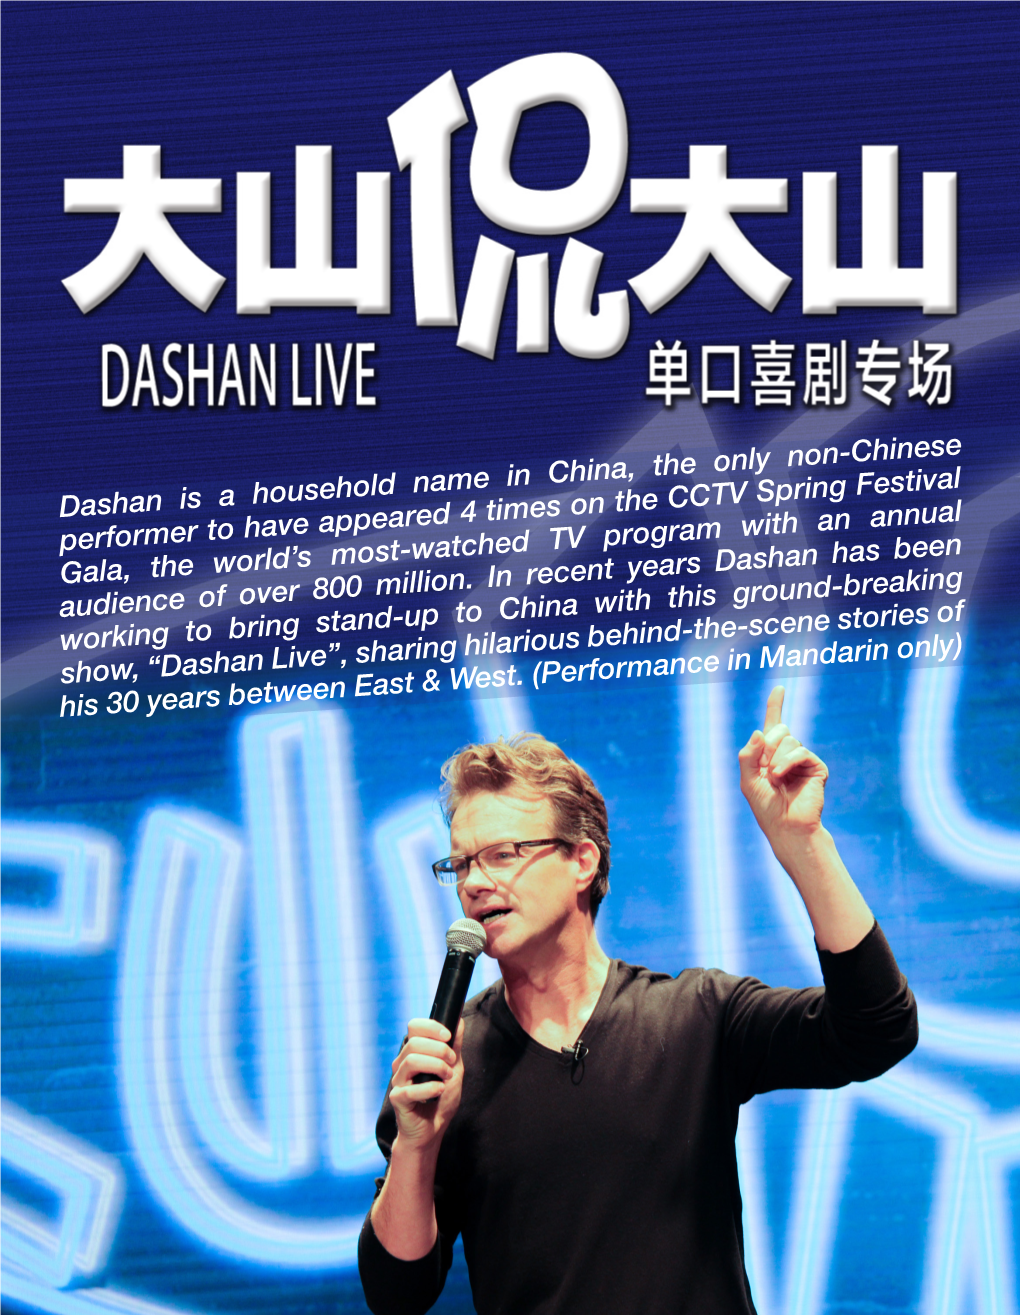 Dashan Is a Household Name in China, the Only Non-Chinese Performer To